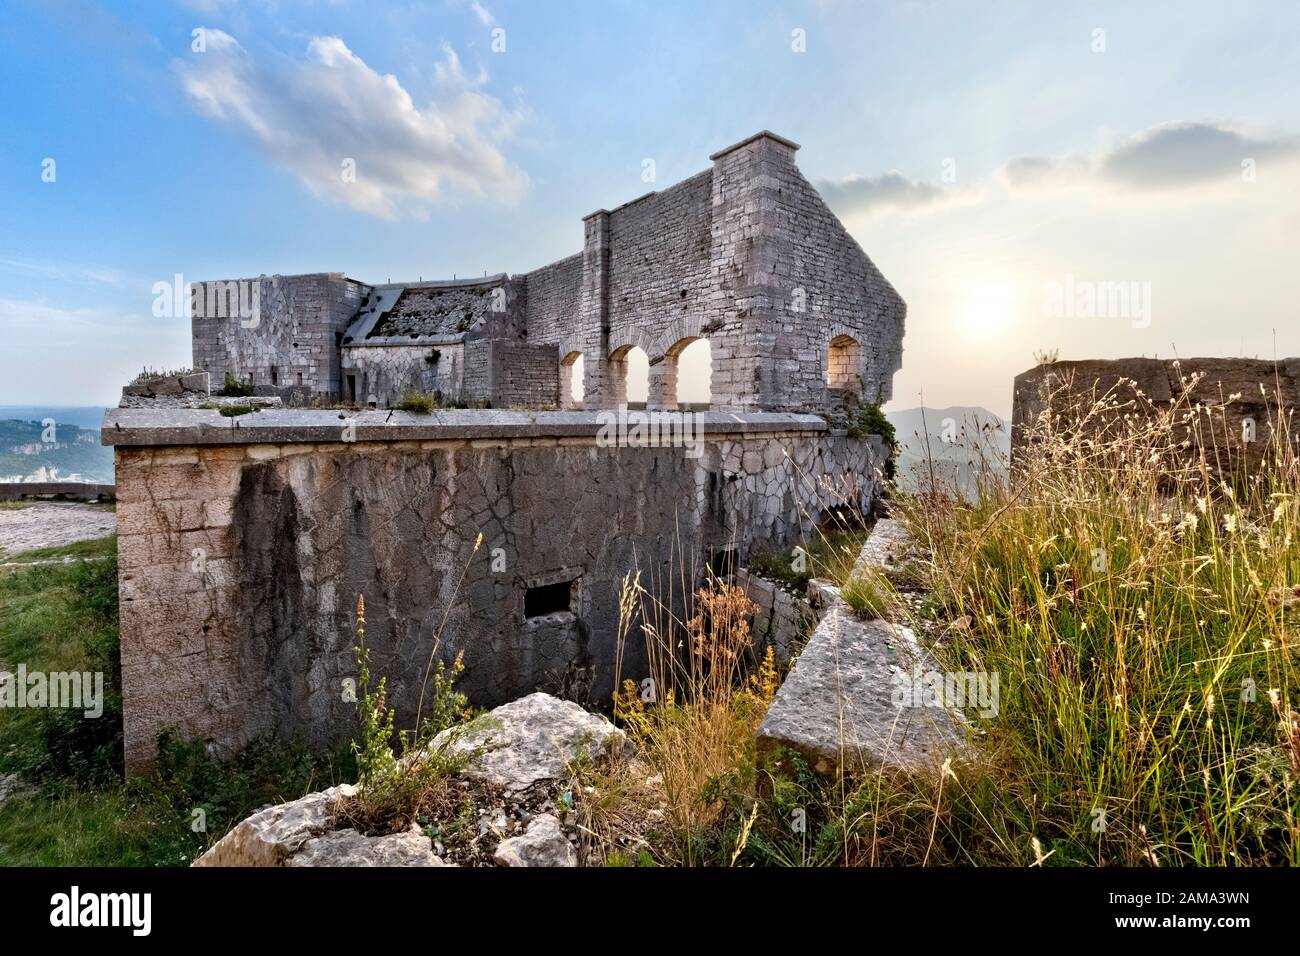 Ruins of Fort Mollinary, a military structure built by the Austrians in the 19th century. Monte, Verona province, Veneto, Italy, Europe. Stock Photo